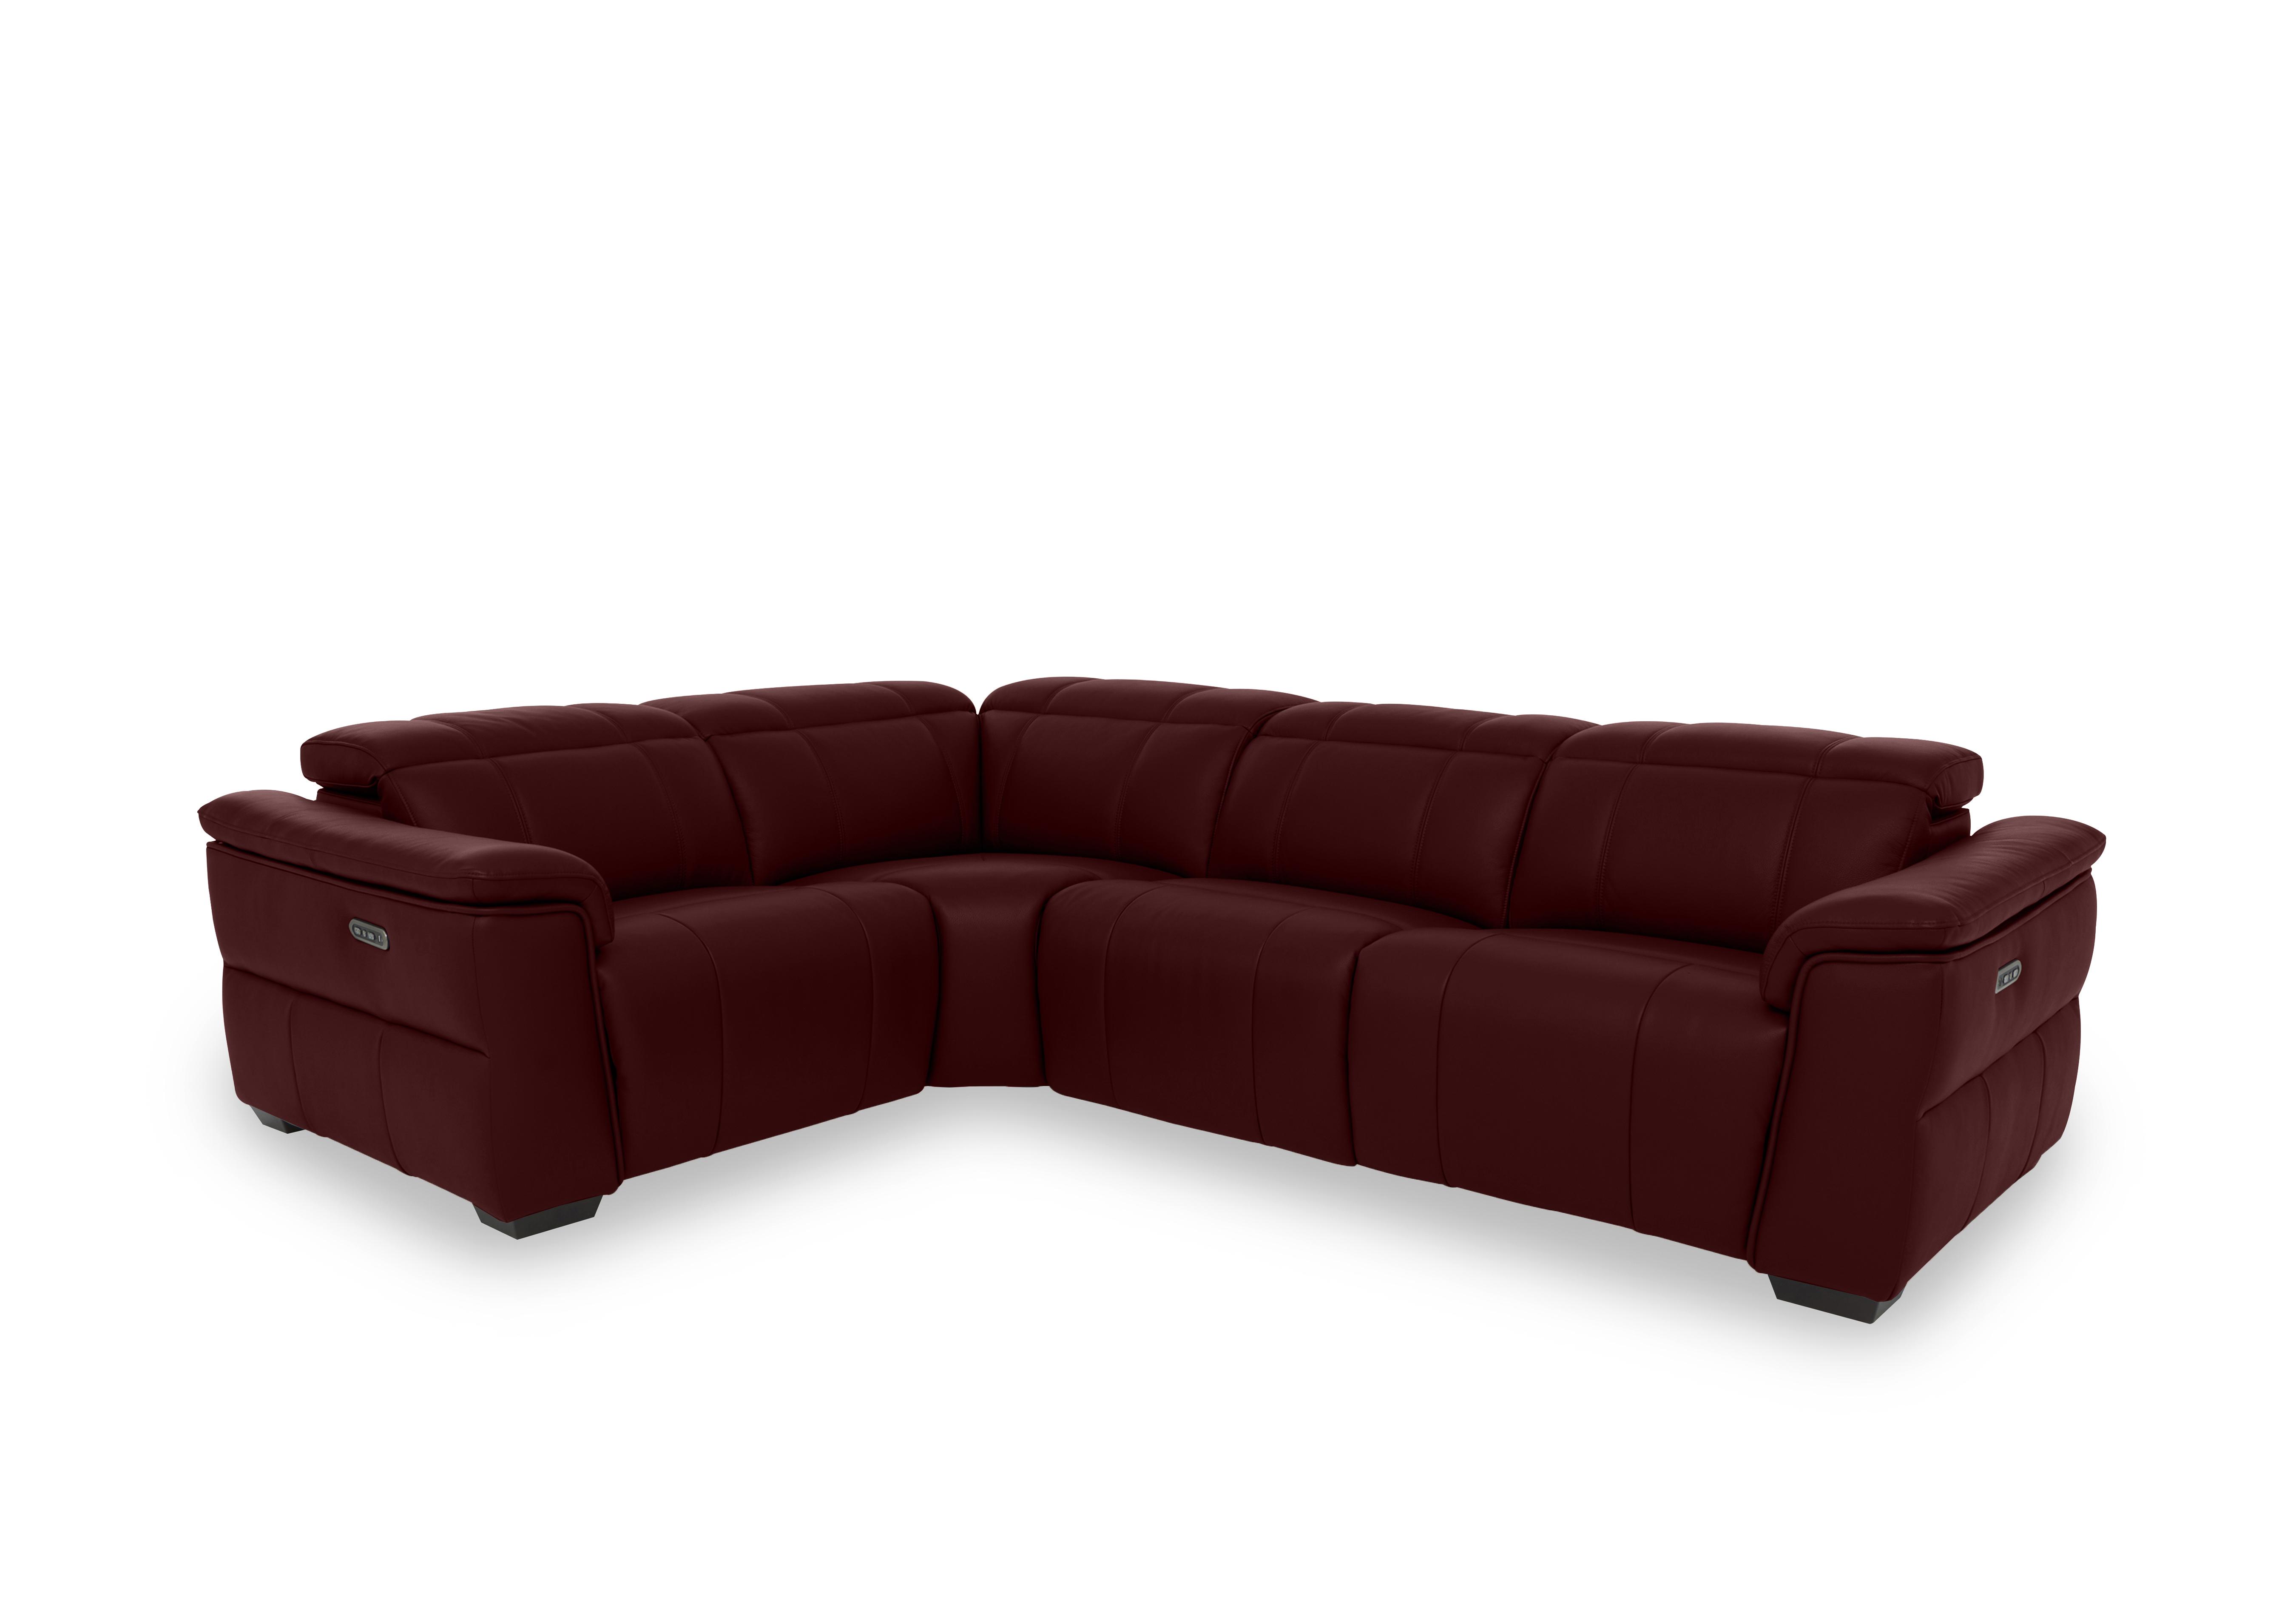 Inca Leather Double Power Recliner Corner Sofa with Power Headrests in Cat-60/15 Ruby on Furniture Village